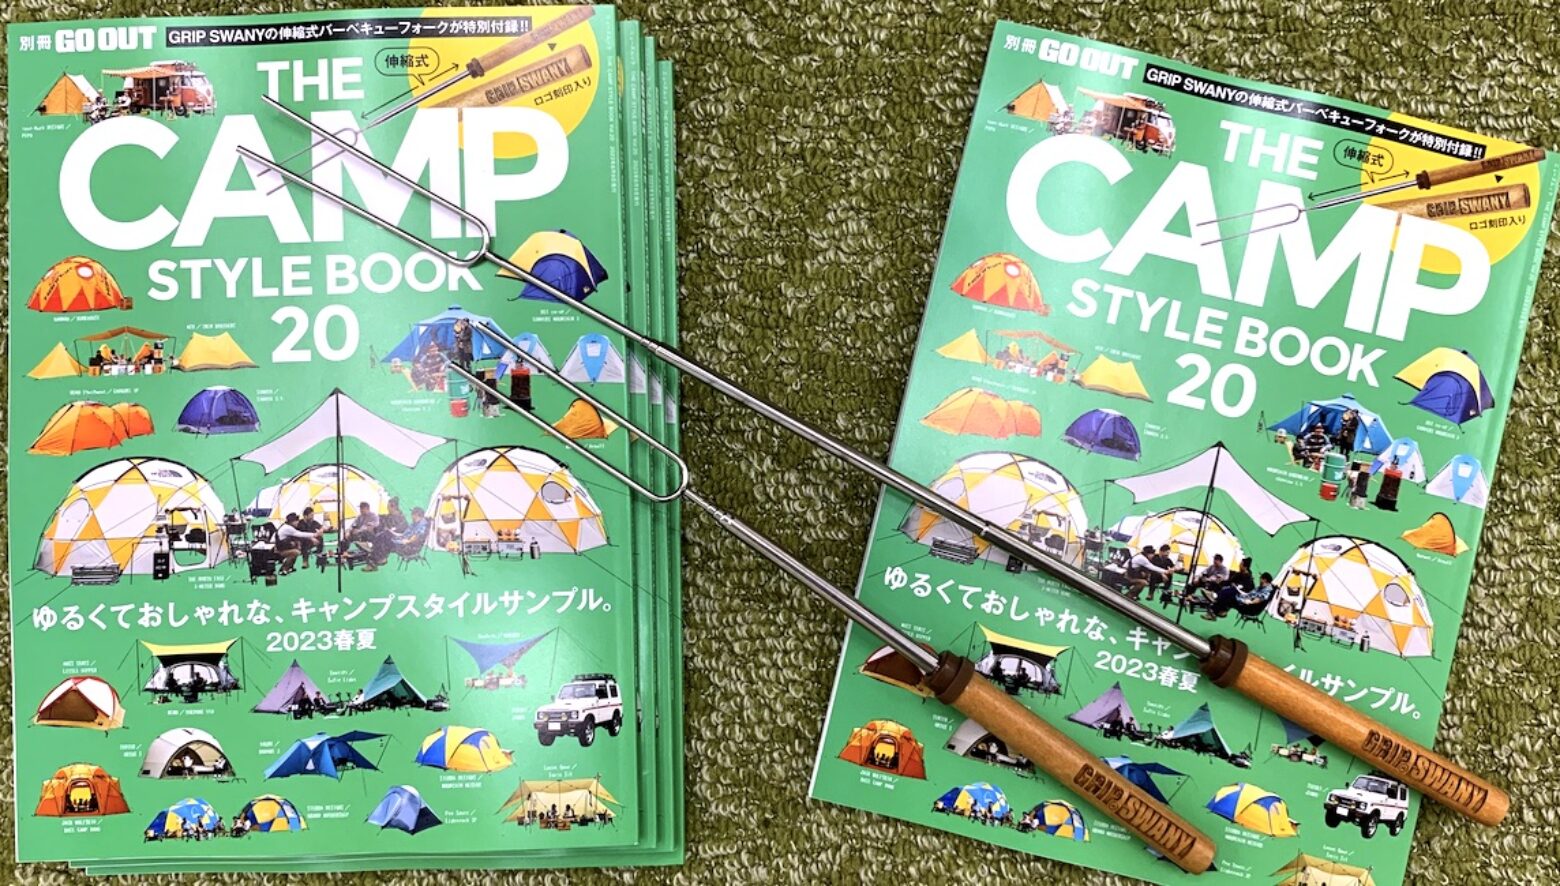 CAMP STYLE BOOK 付録  伸縮式バーベキューフォーク2個セット